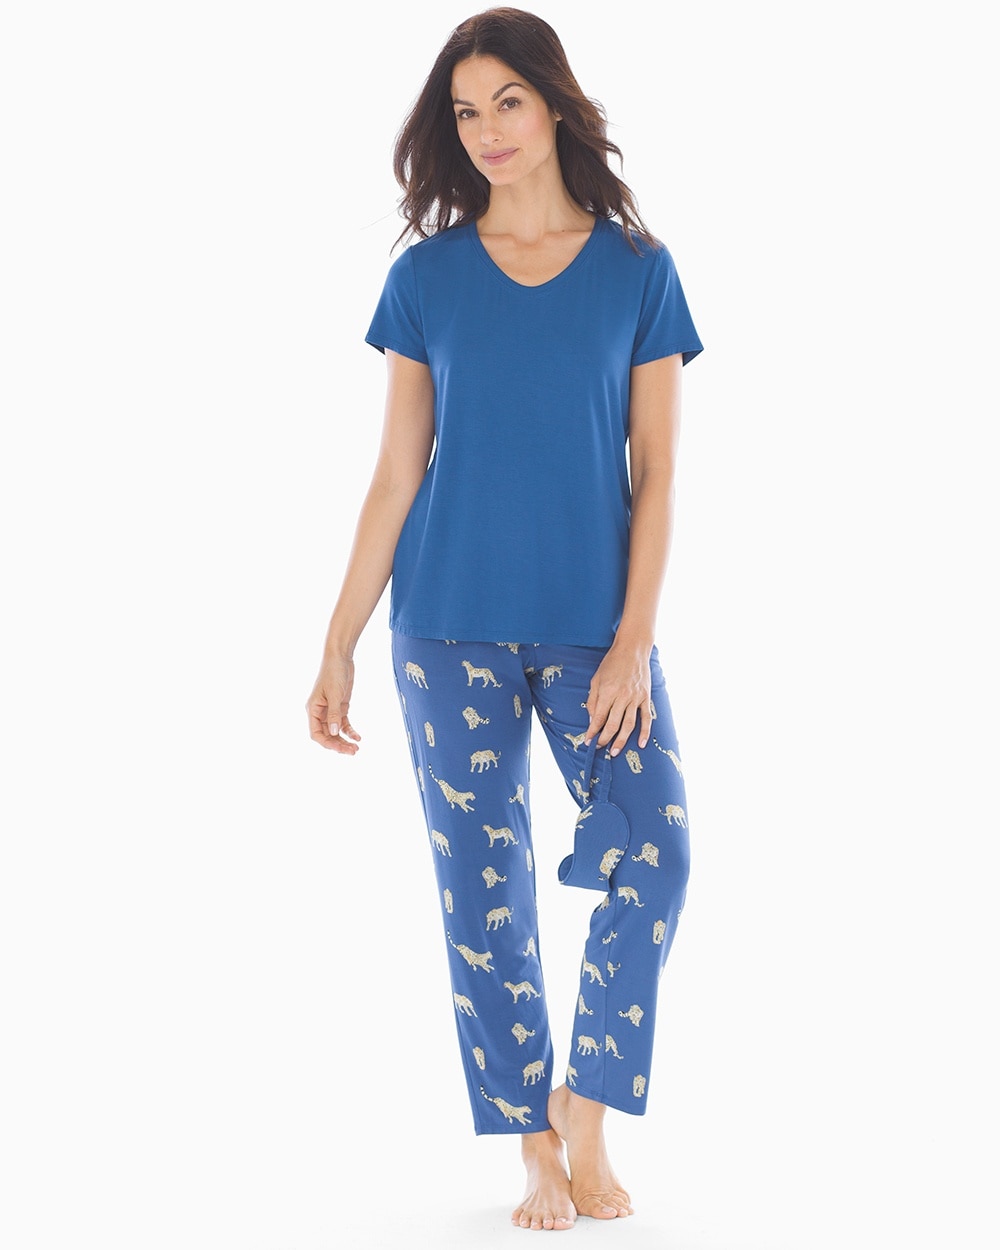 Cool Nights V-Neck Short Sleeve Ankle Length Pajama Set with Eyemask\u00A0Prowling Leopard with Duches